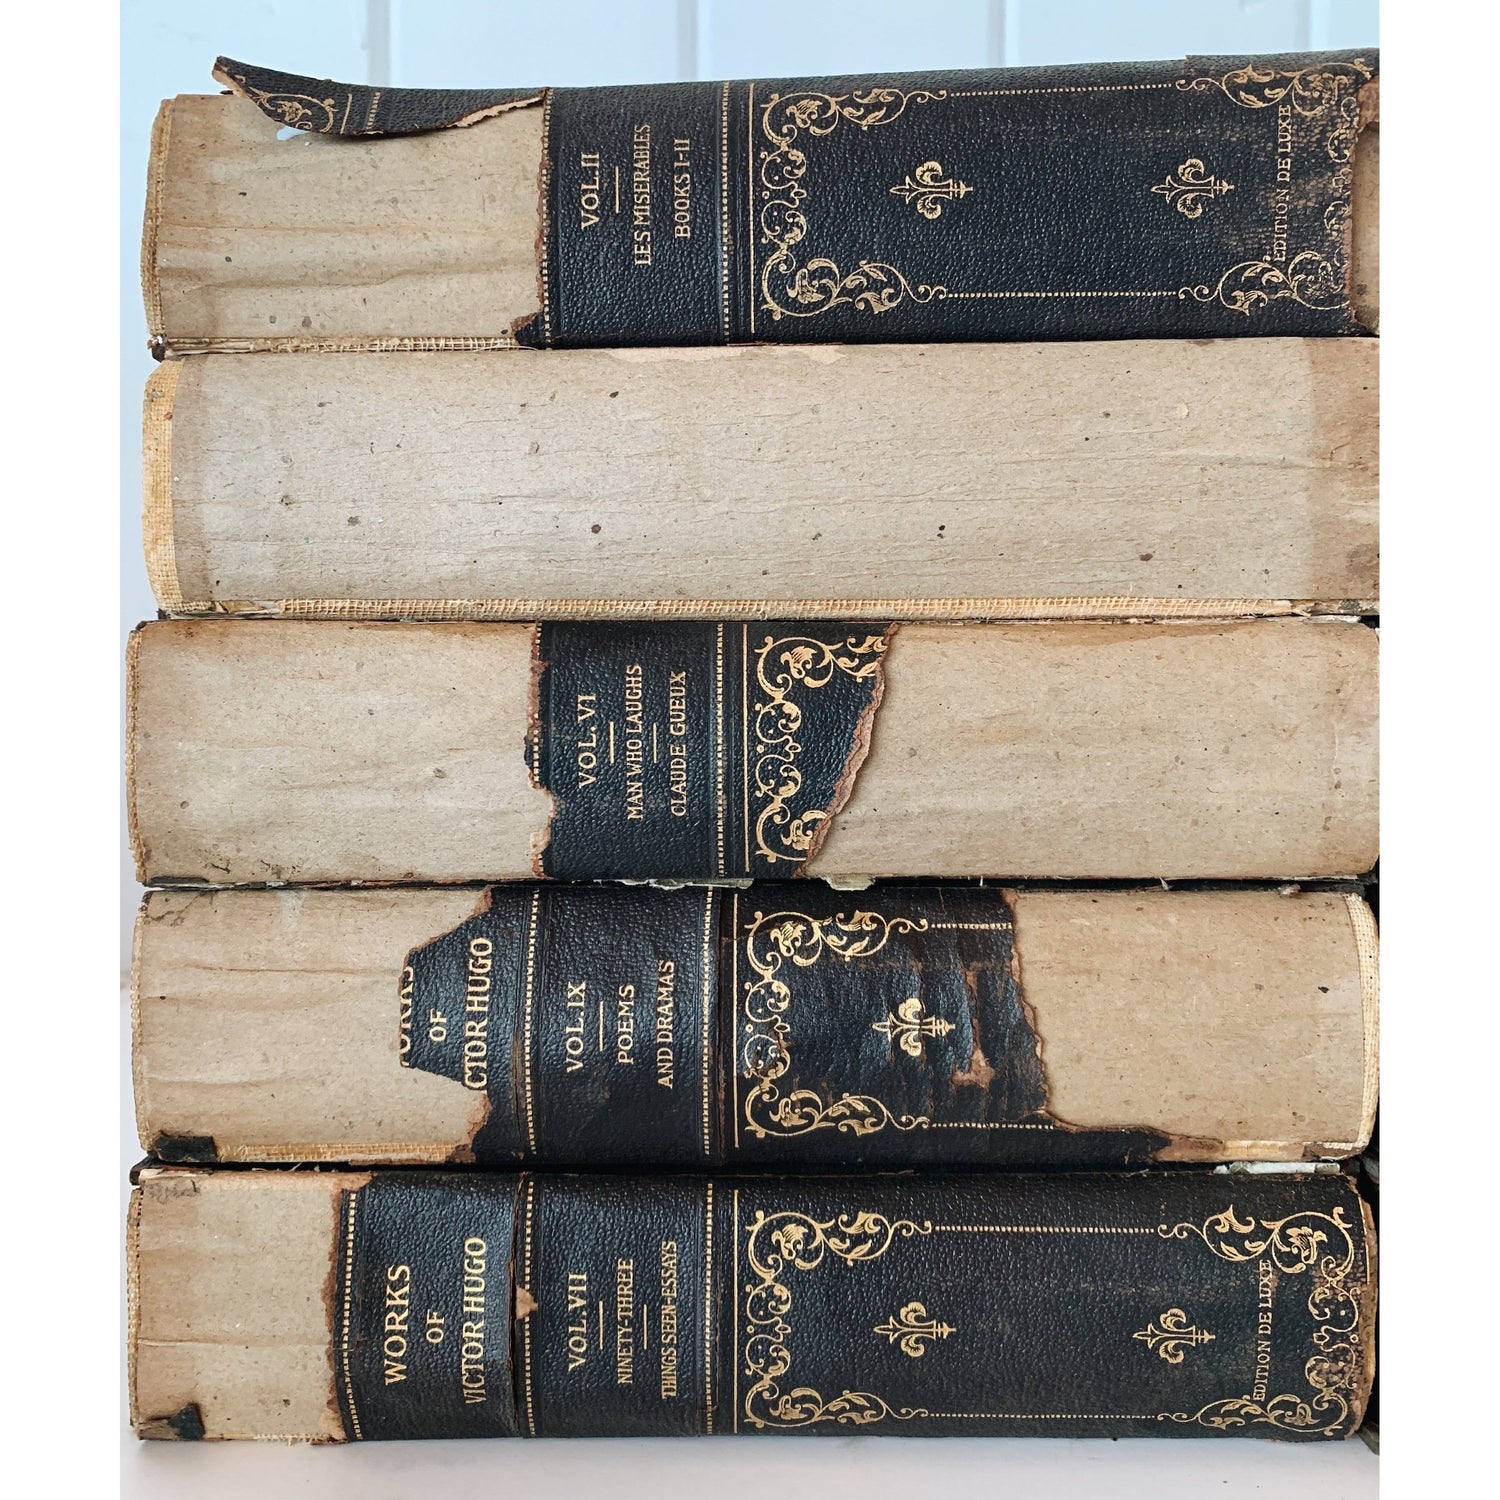 The Works of Victor Hugo, The Chesterfield Society, Edition D Luxe, Black and Beige Shabby Distressed Book Set, French Country